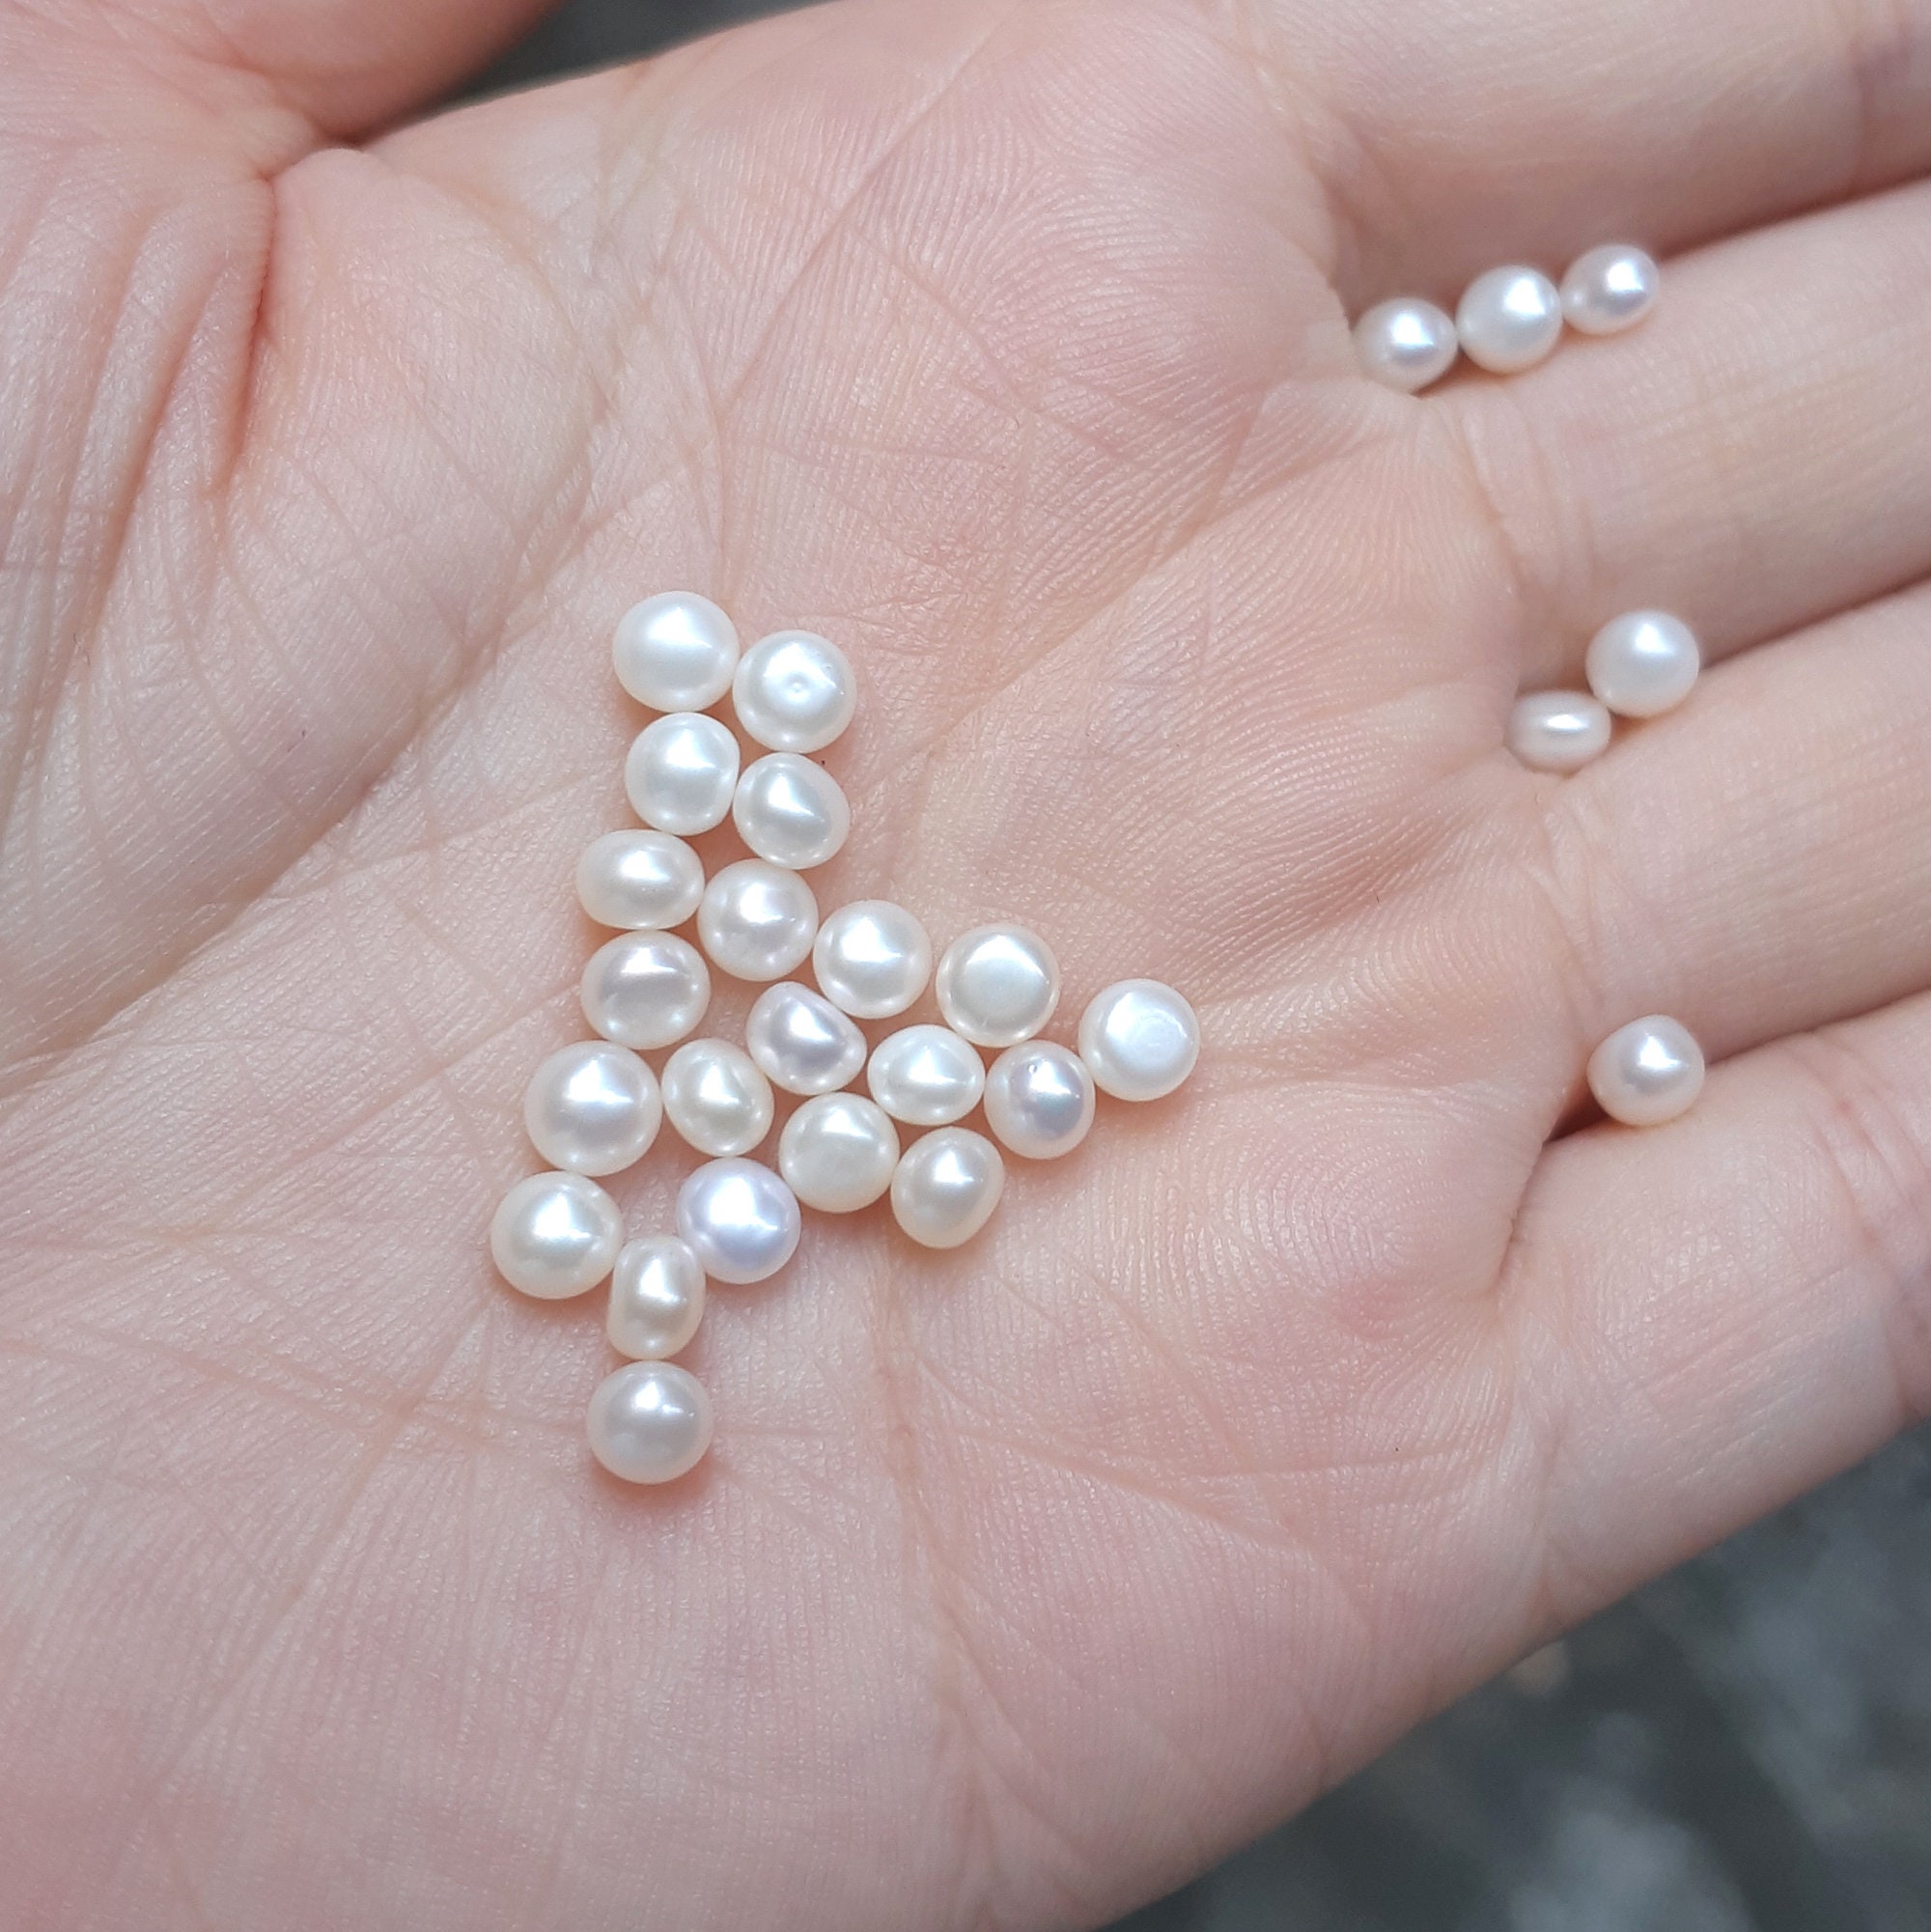 4 5mm Button Pearls Undrilled Cultured Pearls Loose Pearl Etsy